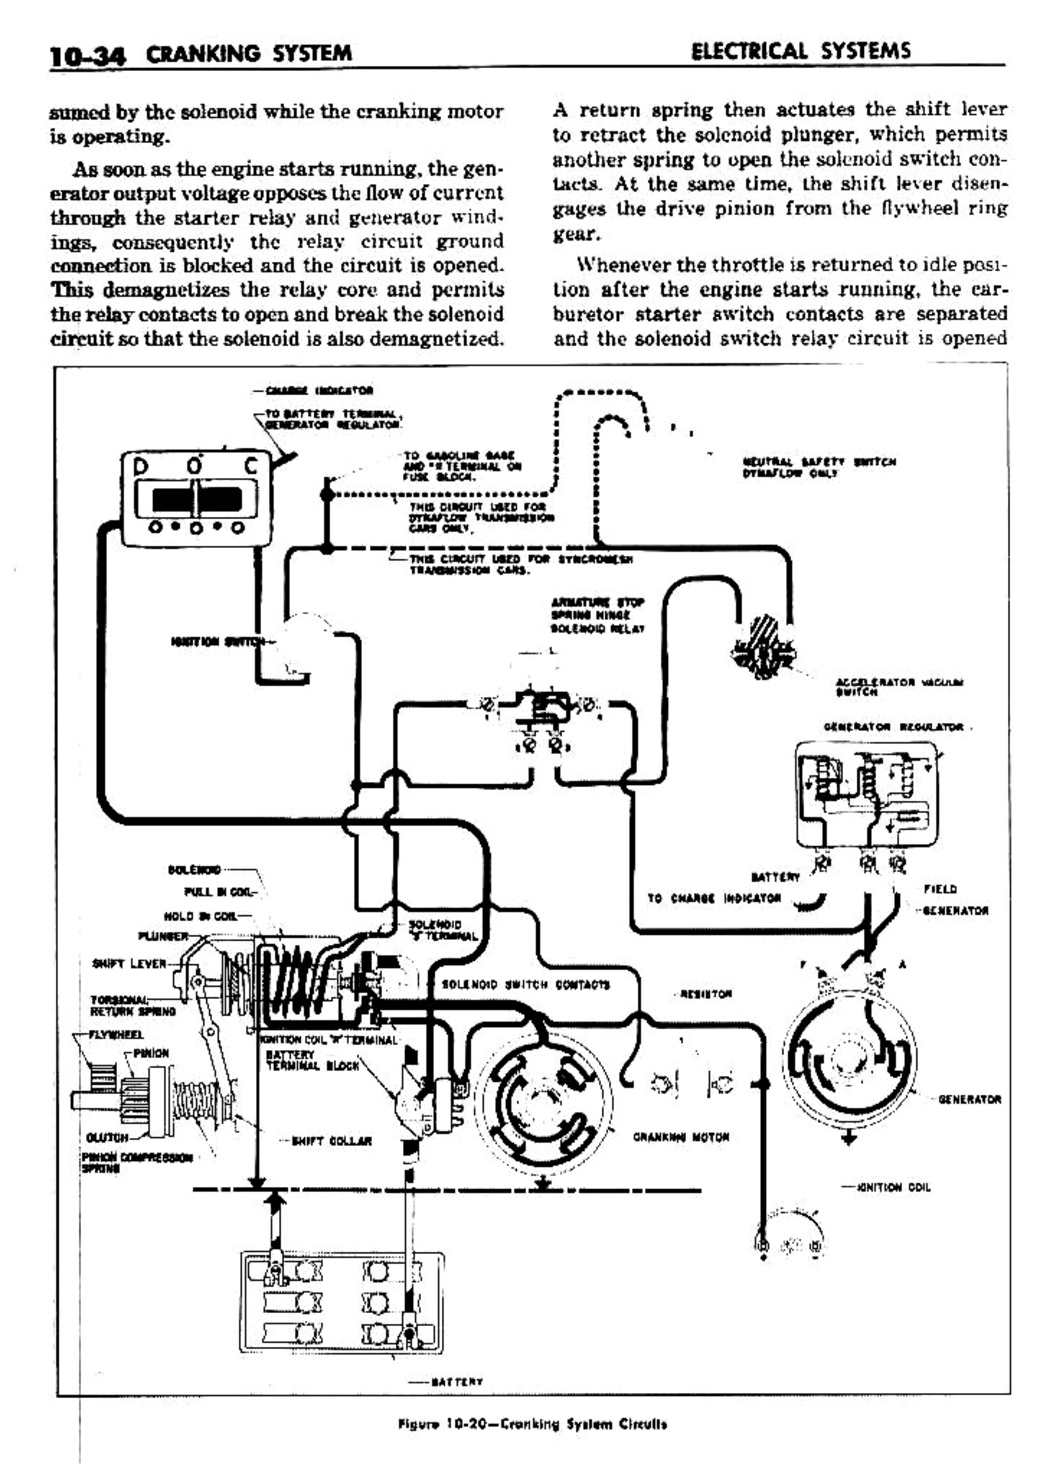 n_11 1959 Buick Shop Manual - Electrical Systems-034-034.jpg